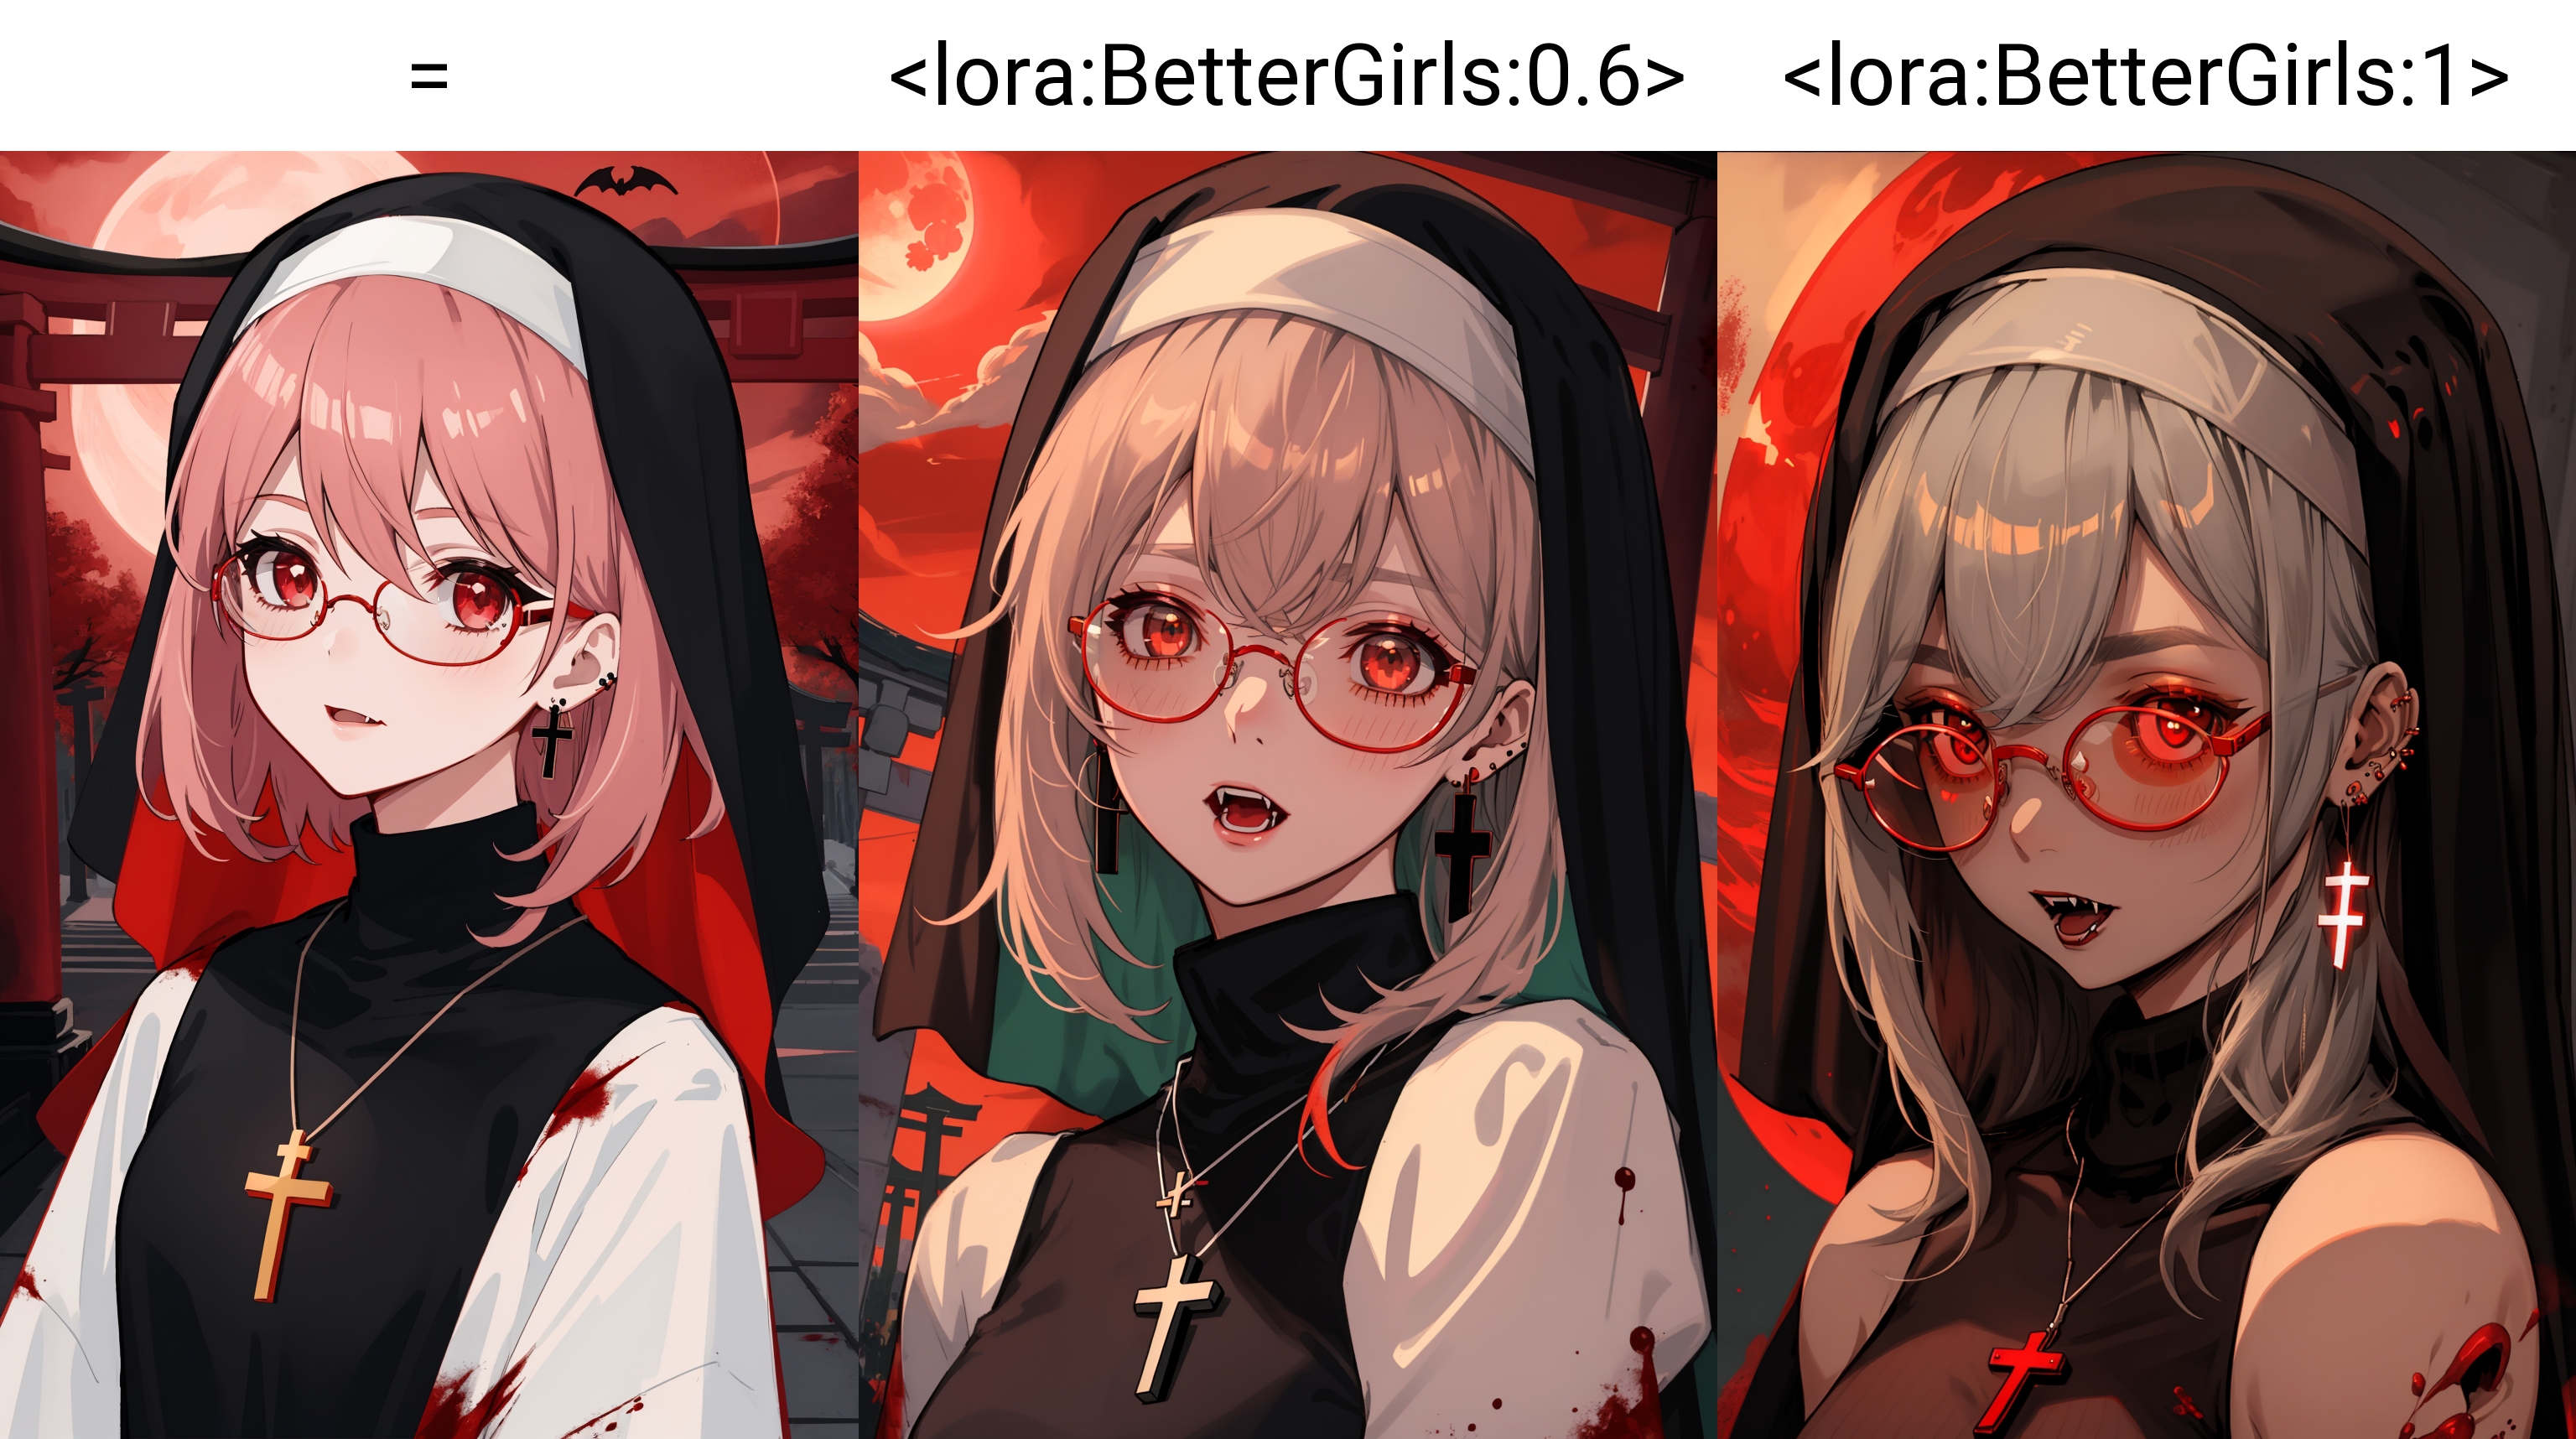 BetterGirls image by ForkY